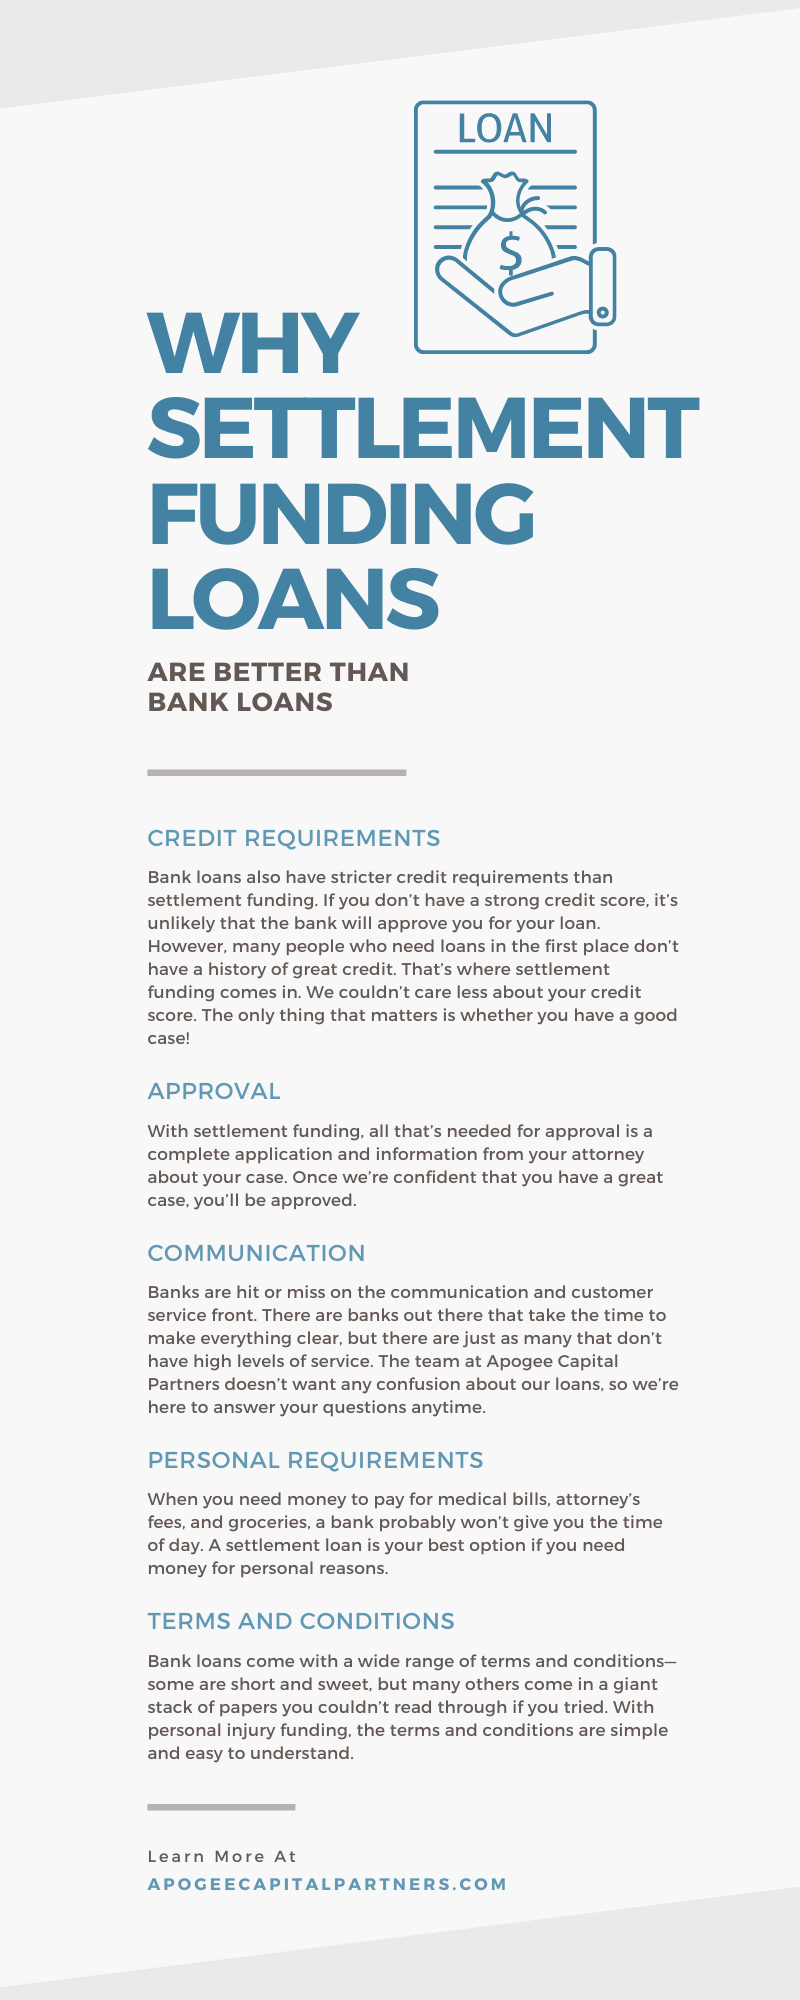 Why Settlement Funding Loans Are Better Than Bank Loans